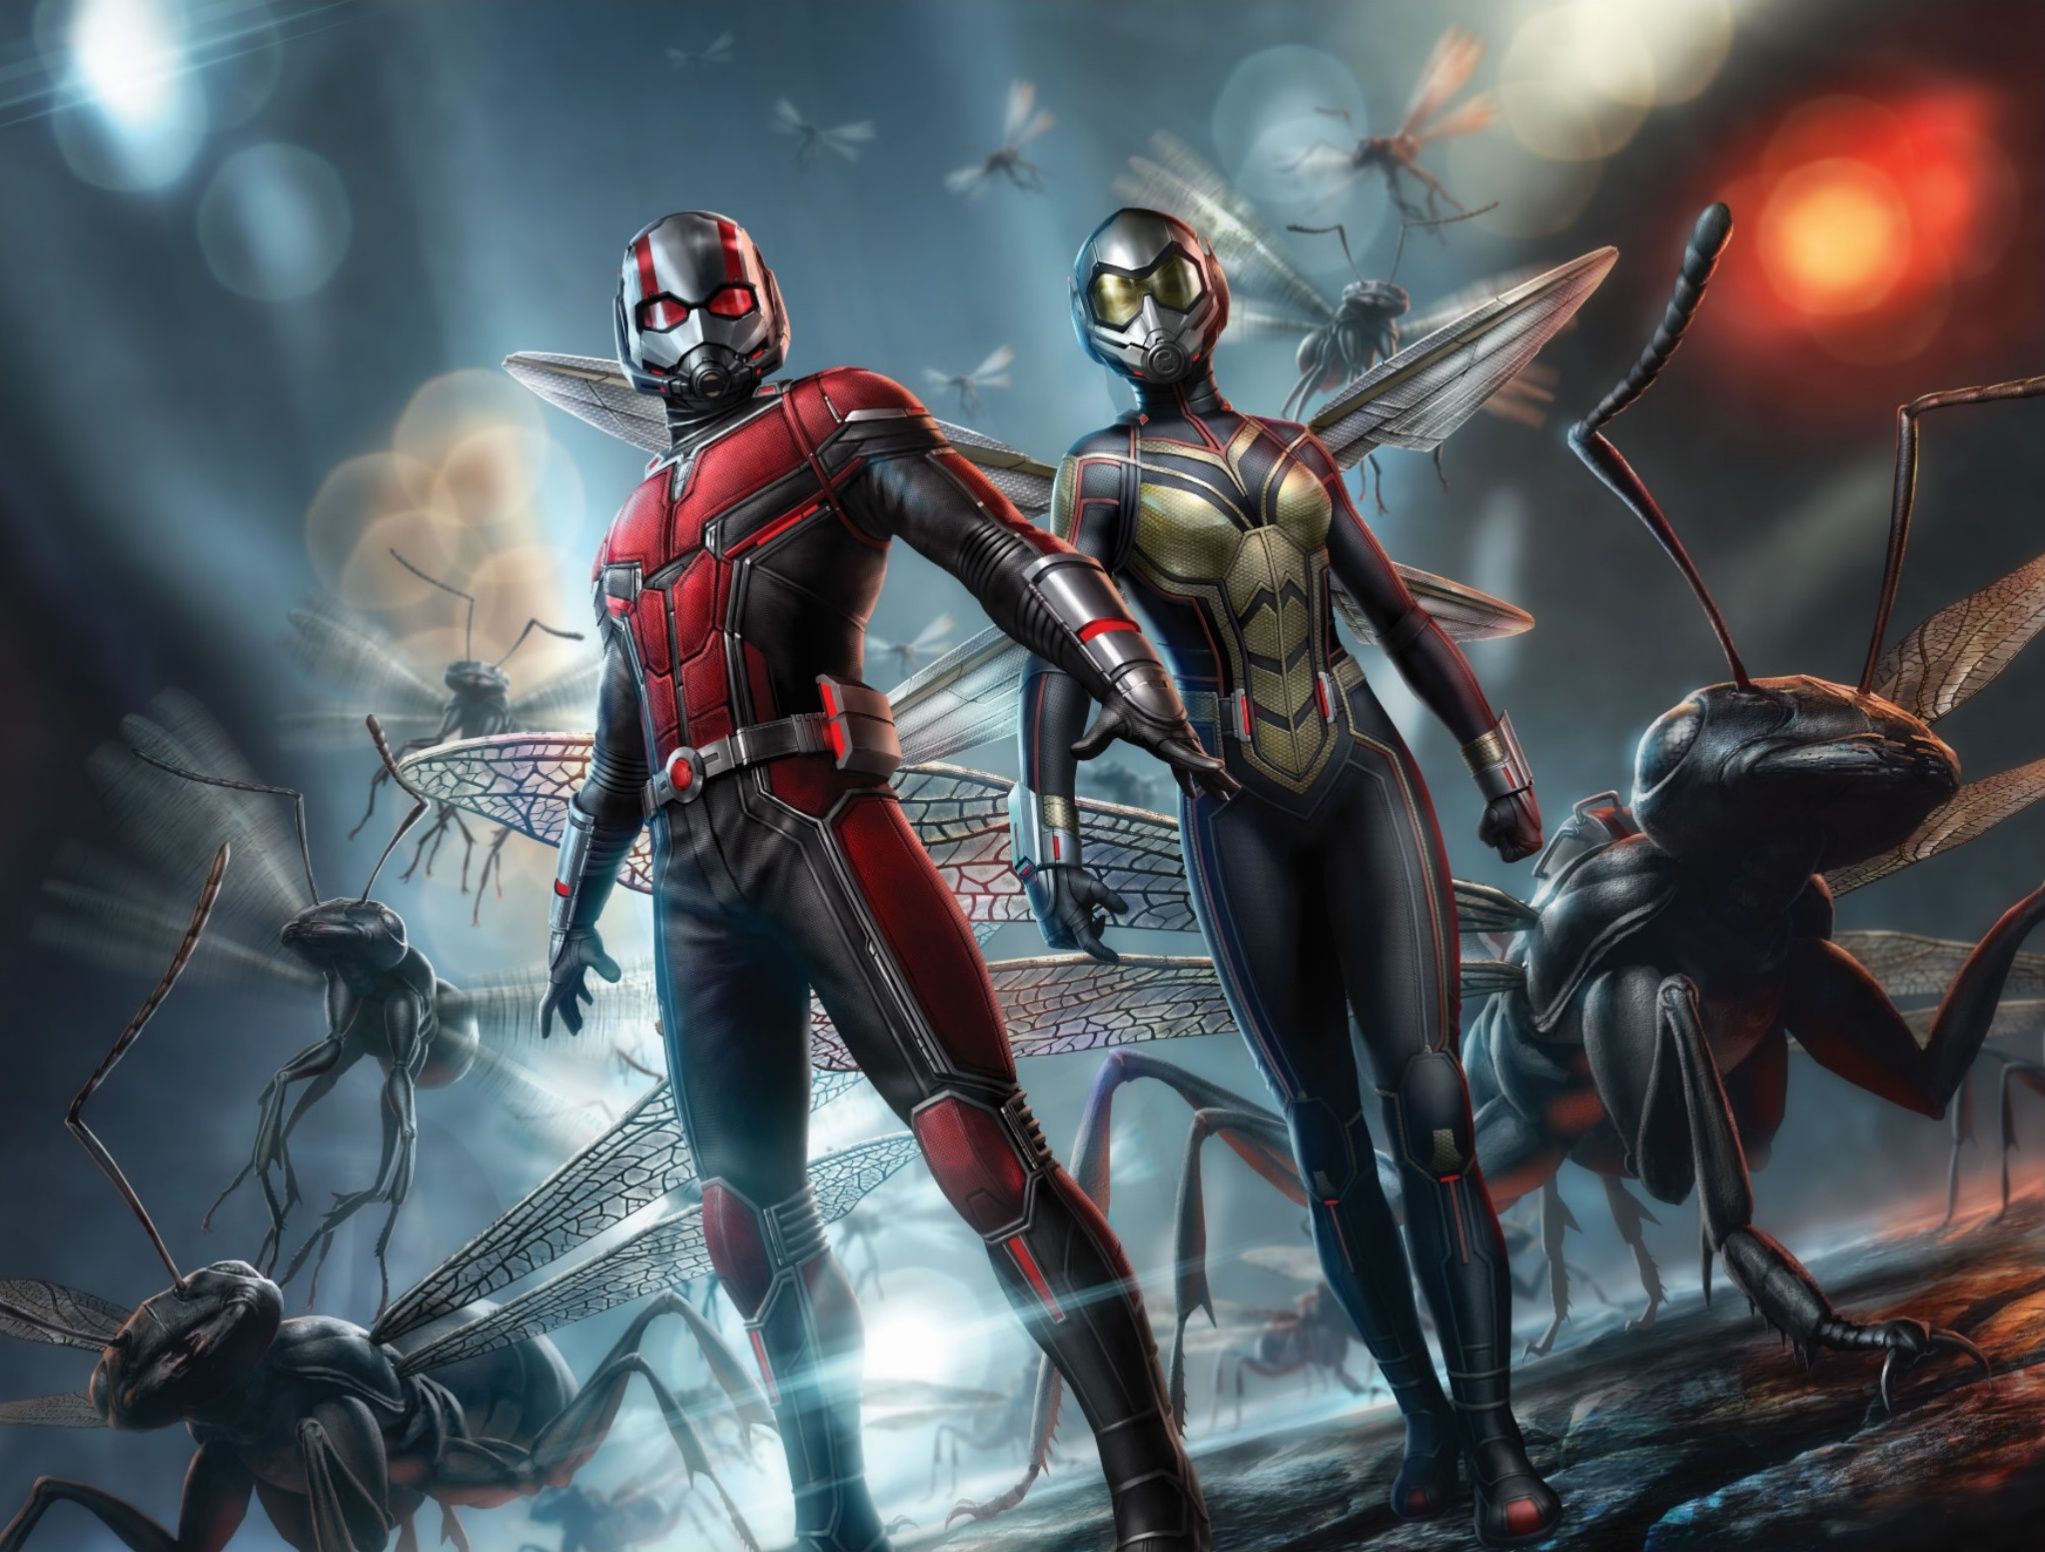 ANT MAN AND THE WASP Promotional Art Offers Fresh New Looks At